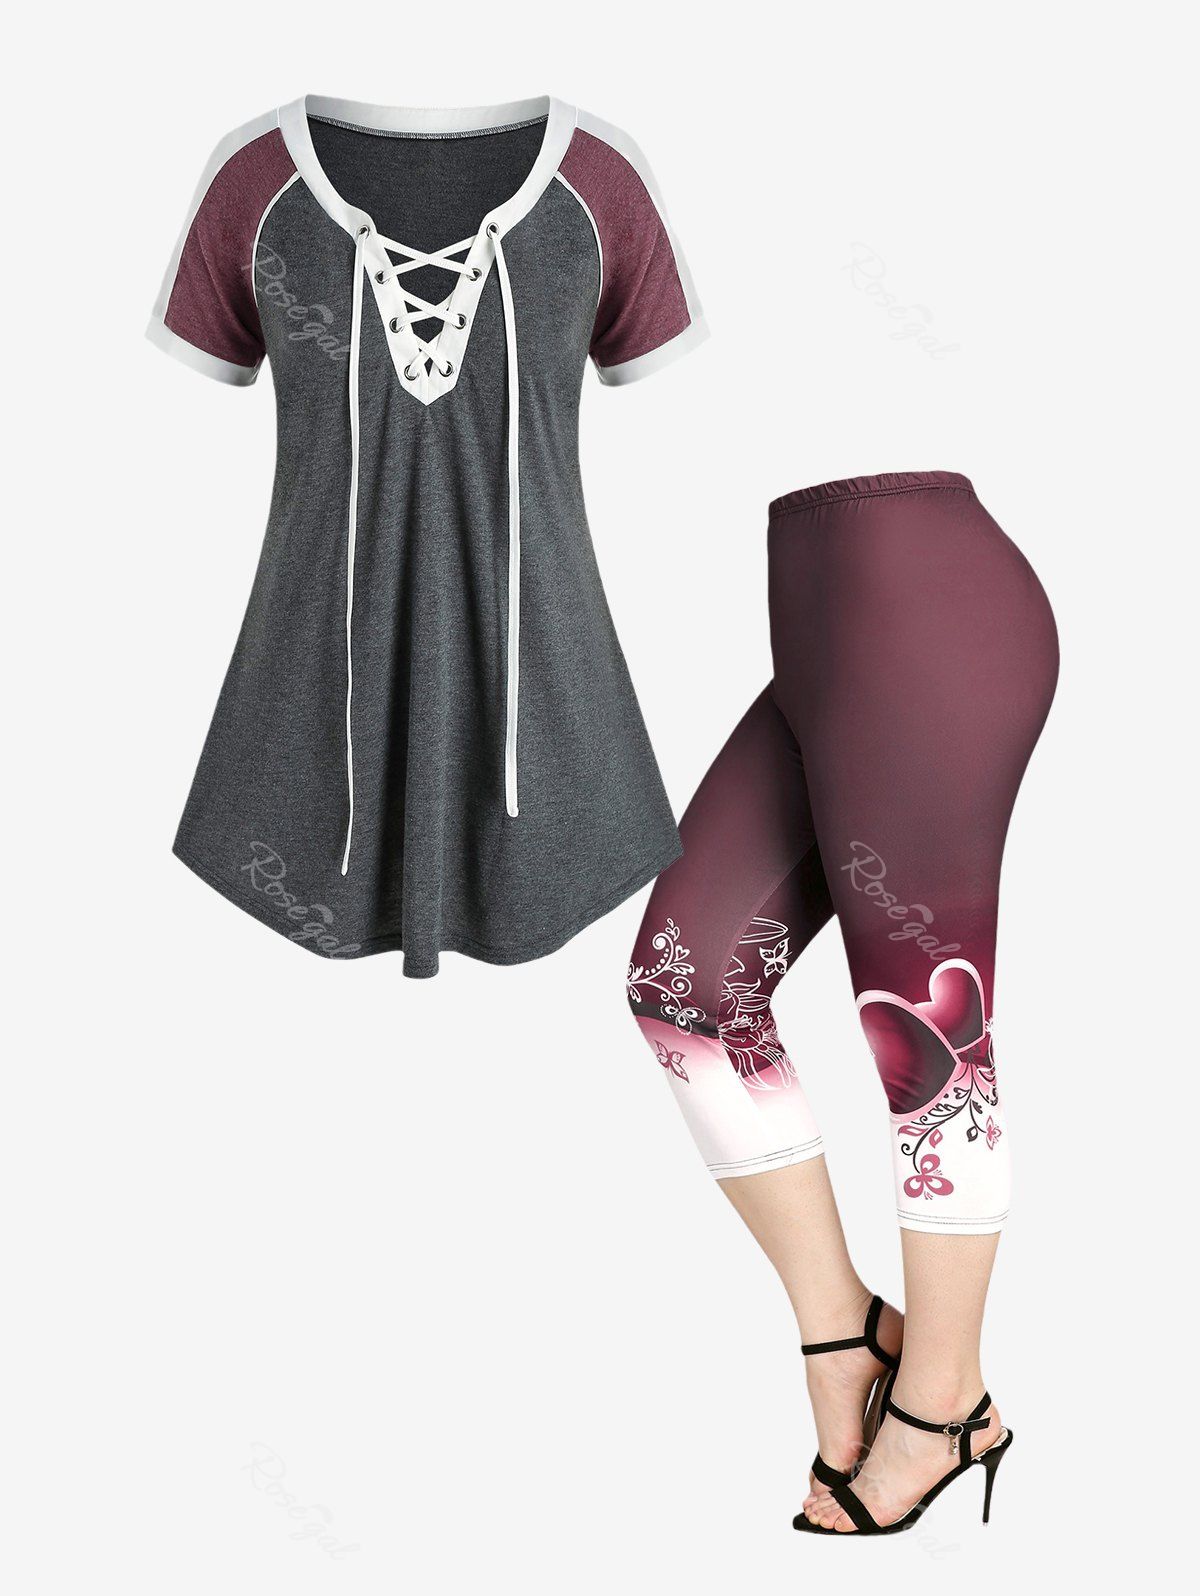 Store Colorblock Lace Up Casual T Shirt and High Waist Heart Floral Print Capri Leggings Plus Size Summer Outfit  